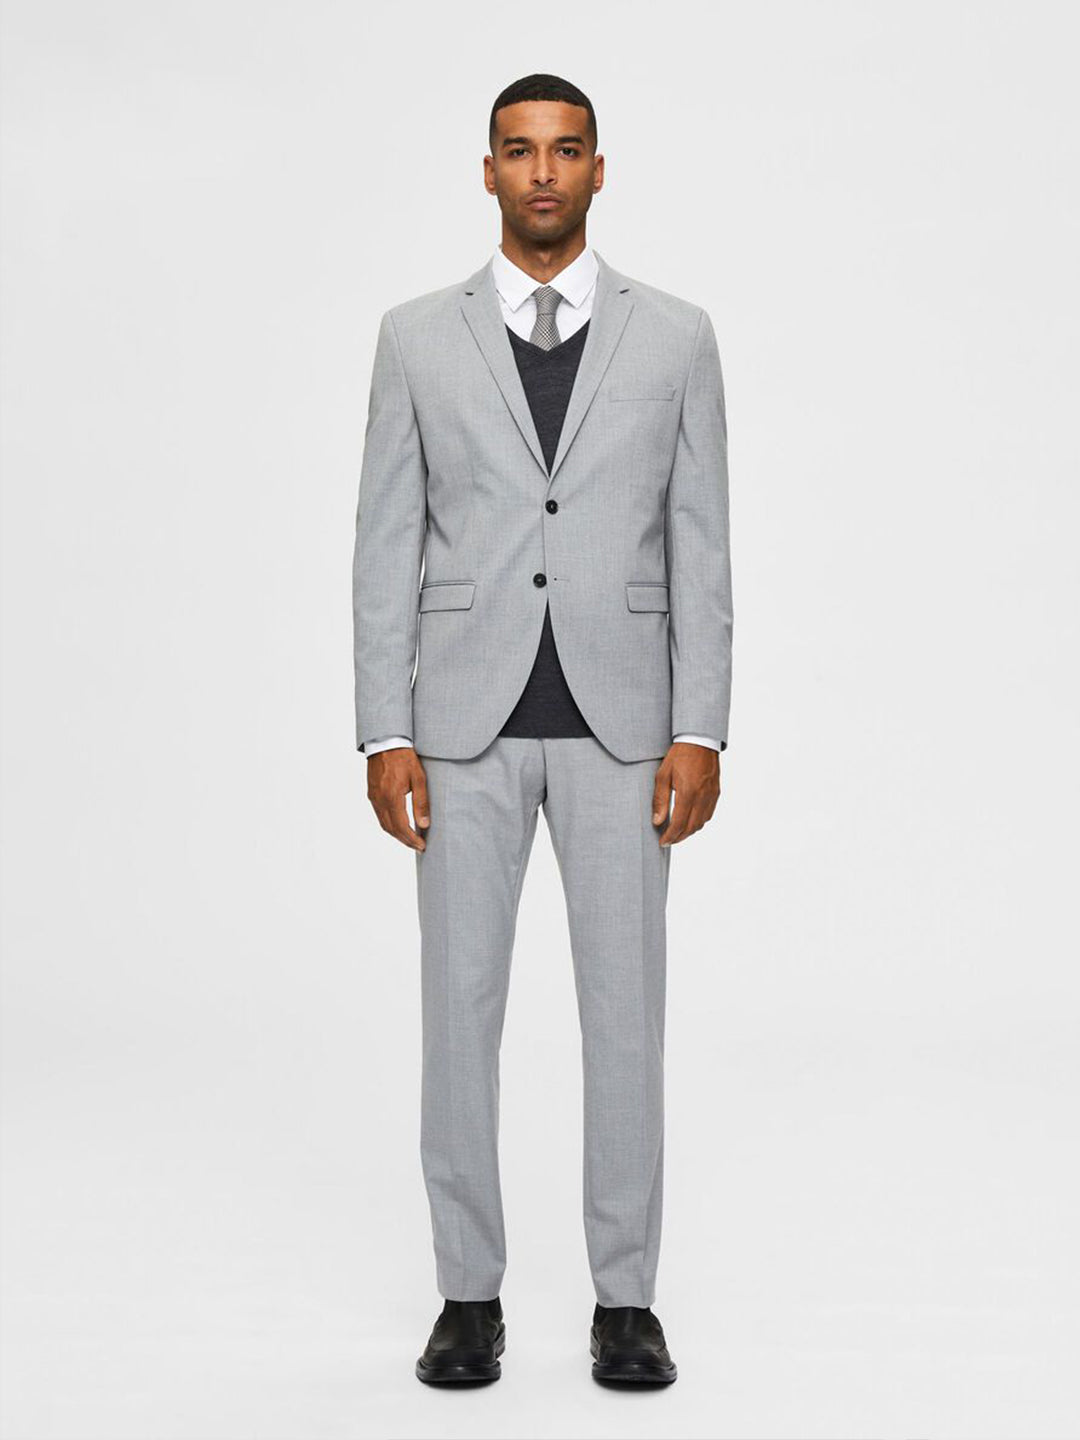 Selected Suit Jacket and Trousers